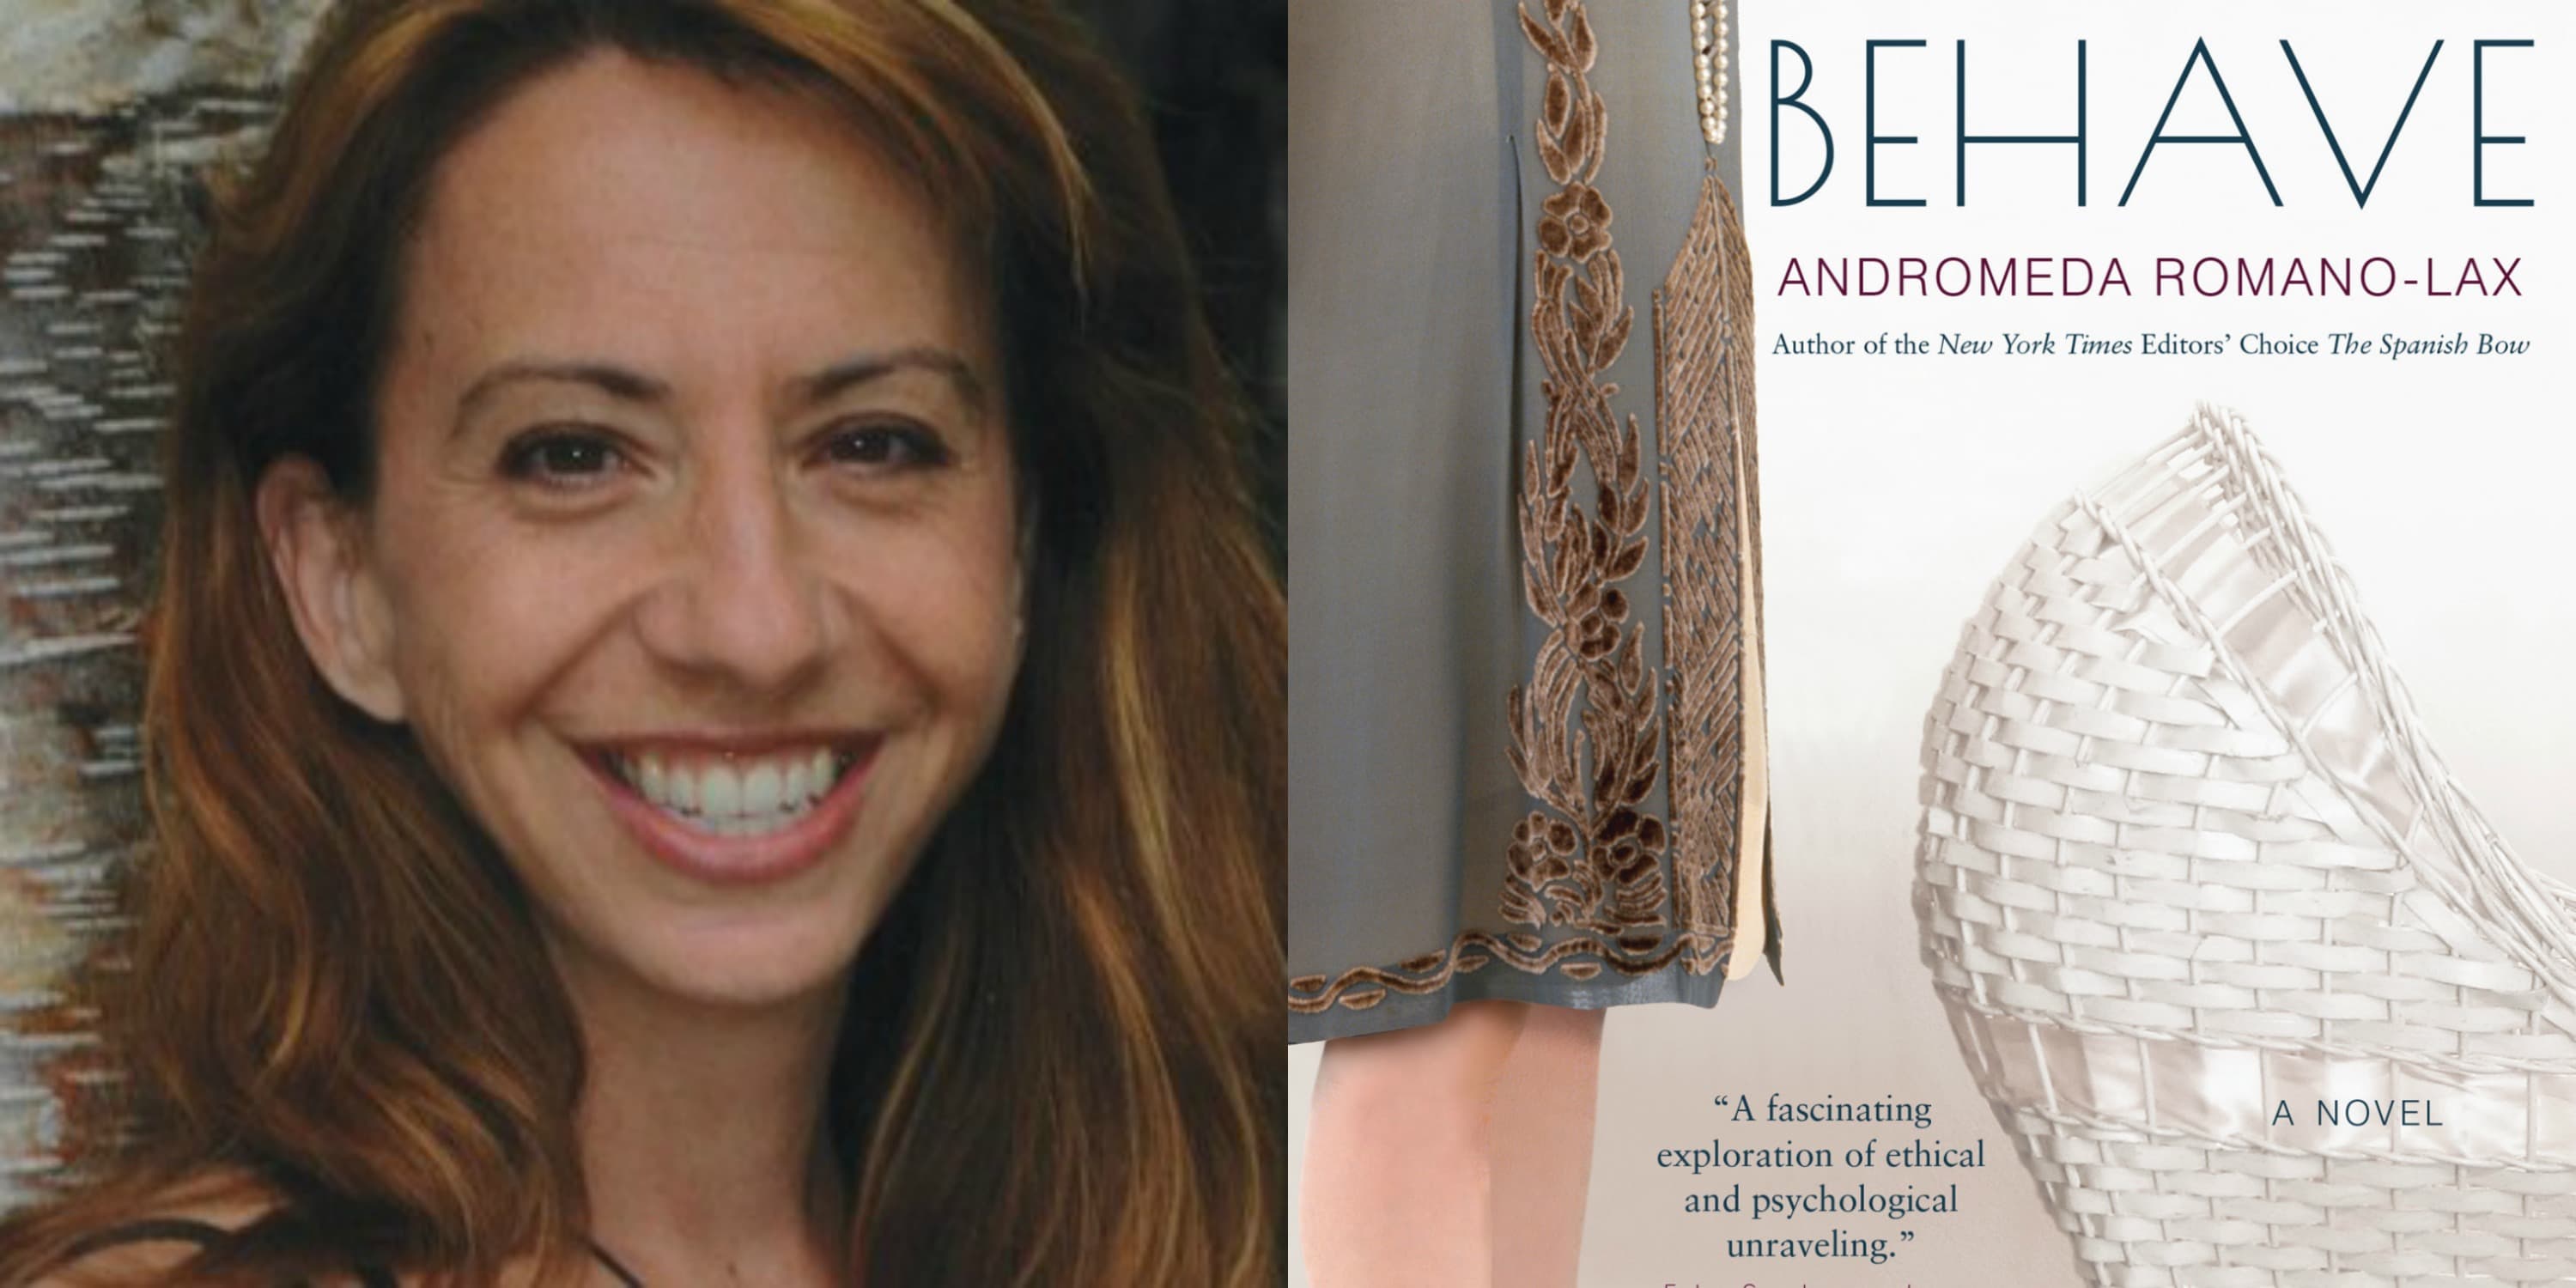 Sundays With Writers: Behave by Andromeda Romano-Lax